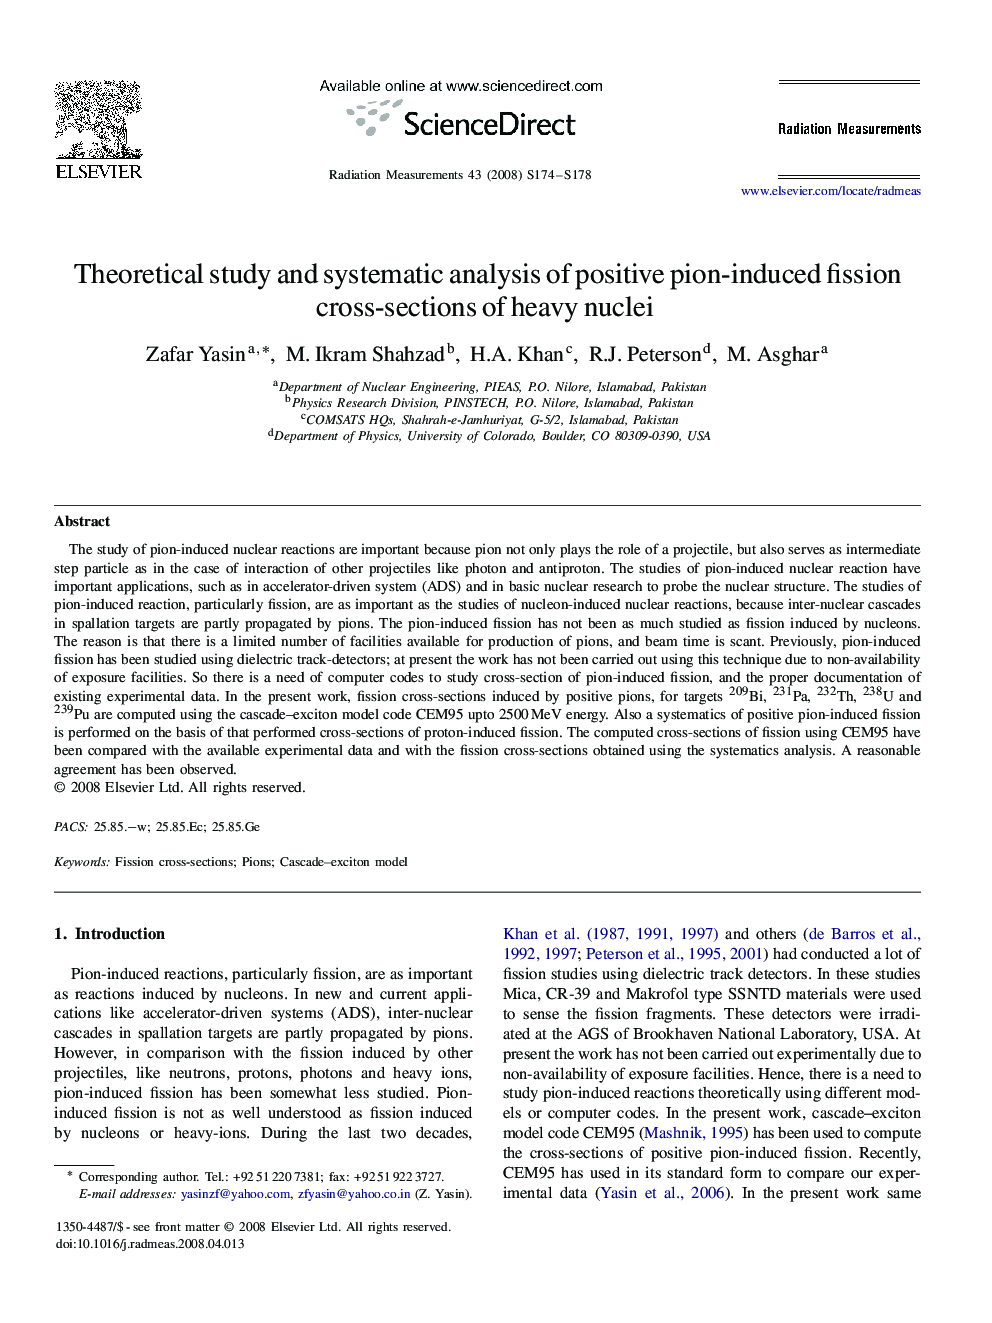 Theoretical study and systematic analysis of positive pion-induced fission cross-sections of heavy nuclei